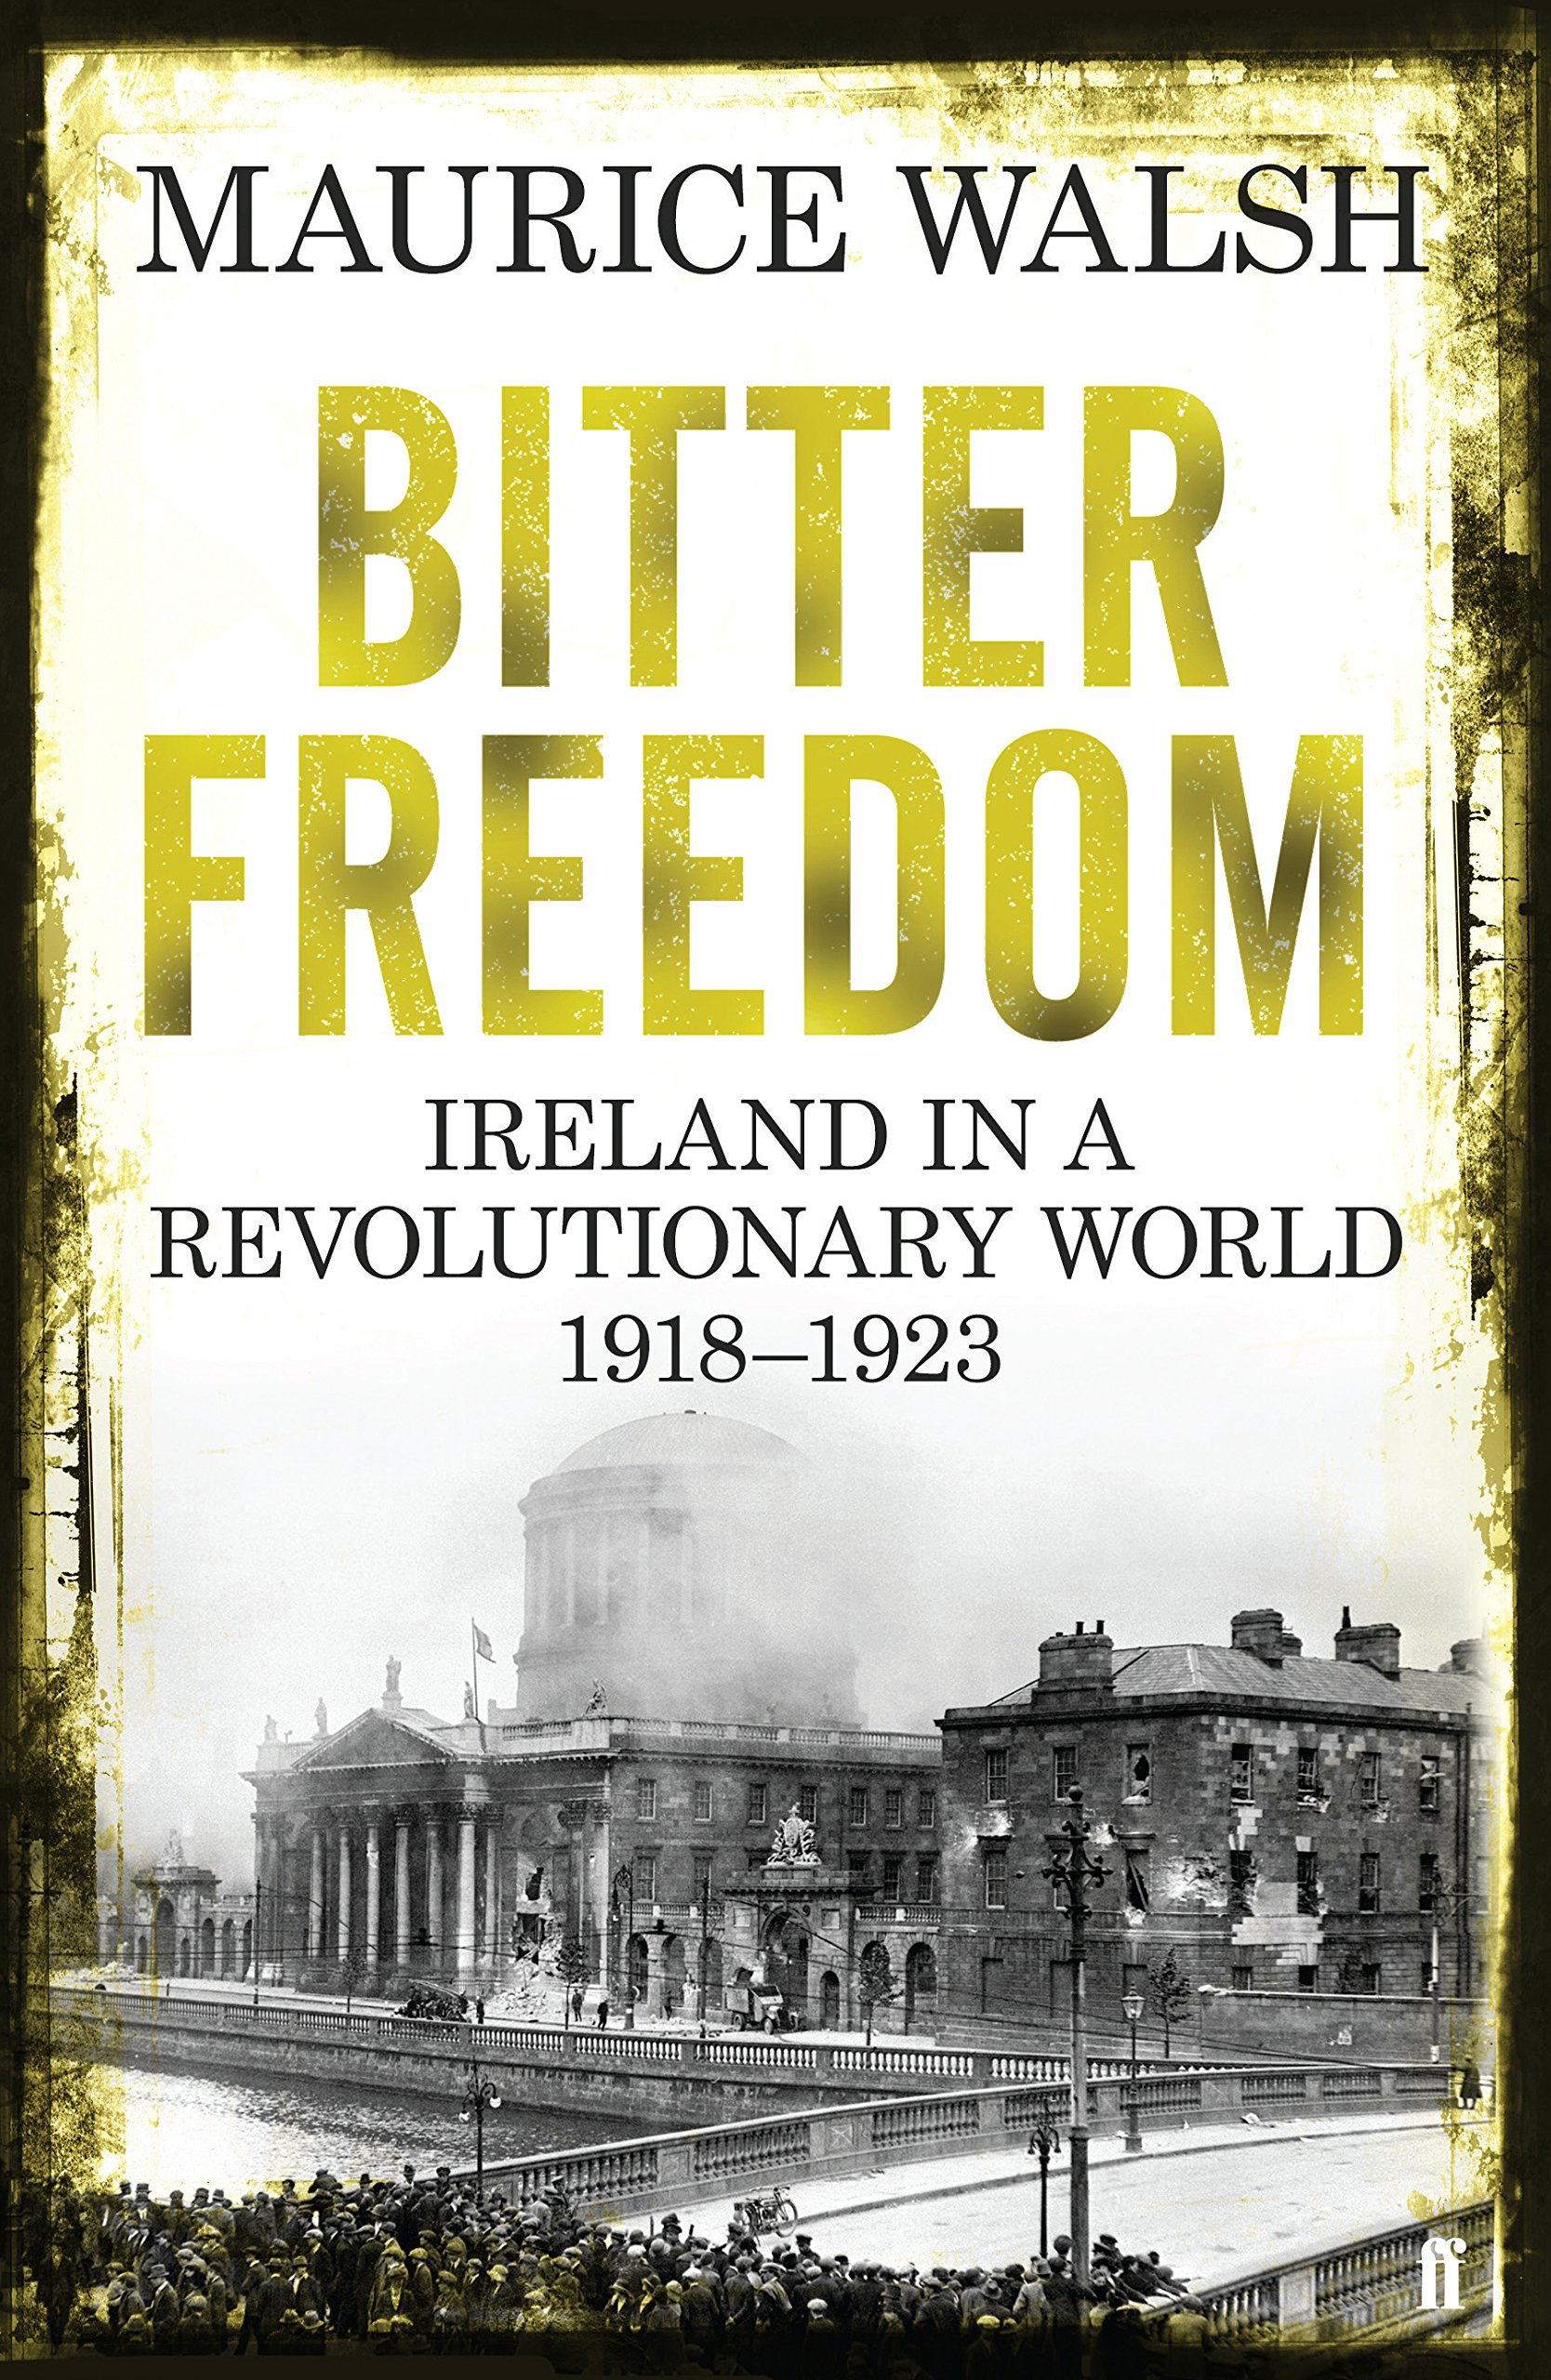 Bitter Freedom: Ireland in a Revolutionary World 1918–1923 by Maurice Walsh.